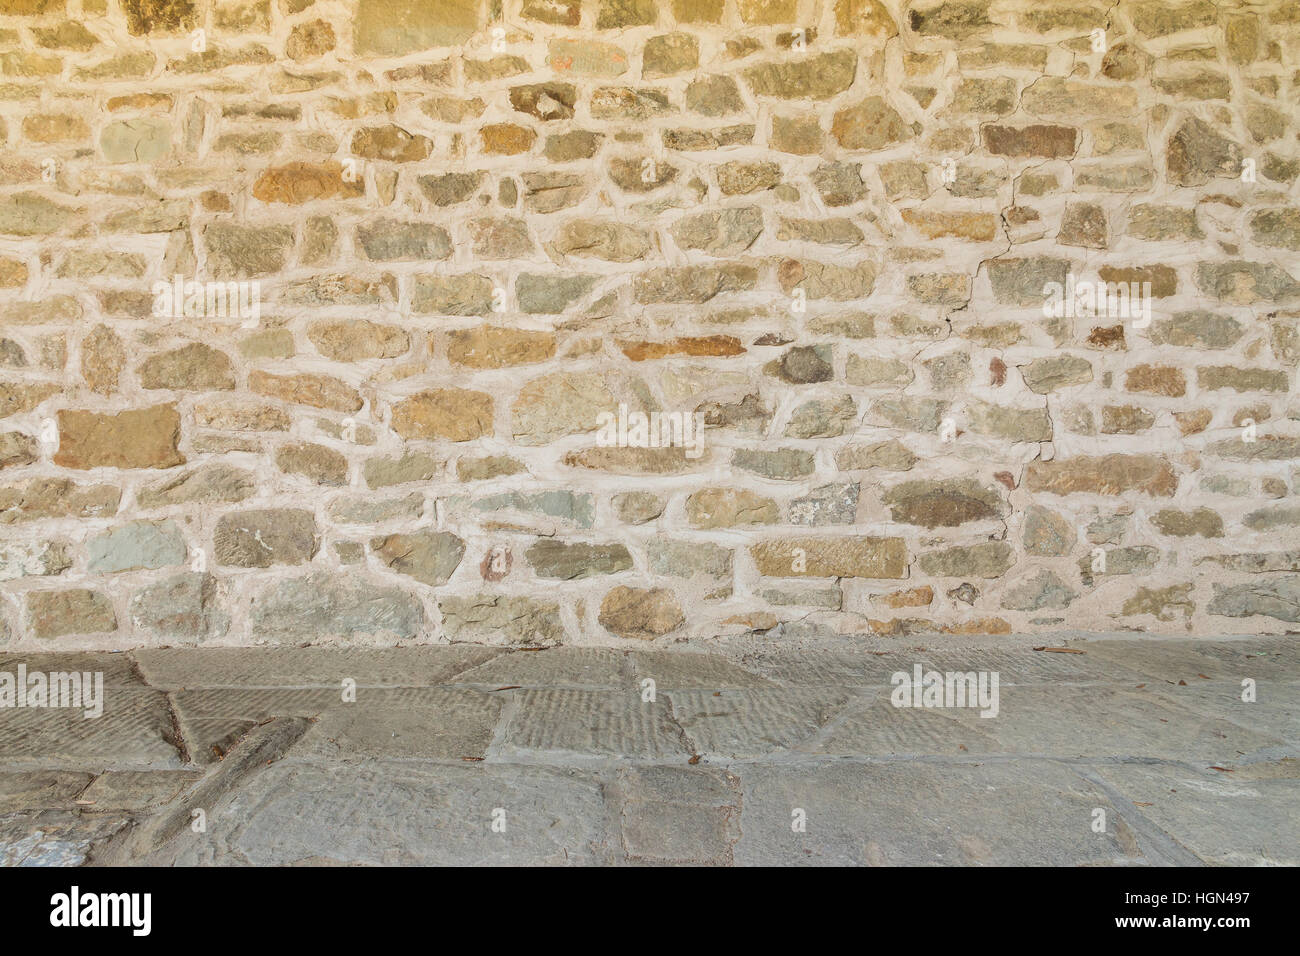 Rough medieval wall and floor of monastery Italy Stock Photo